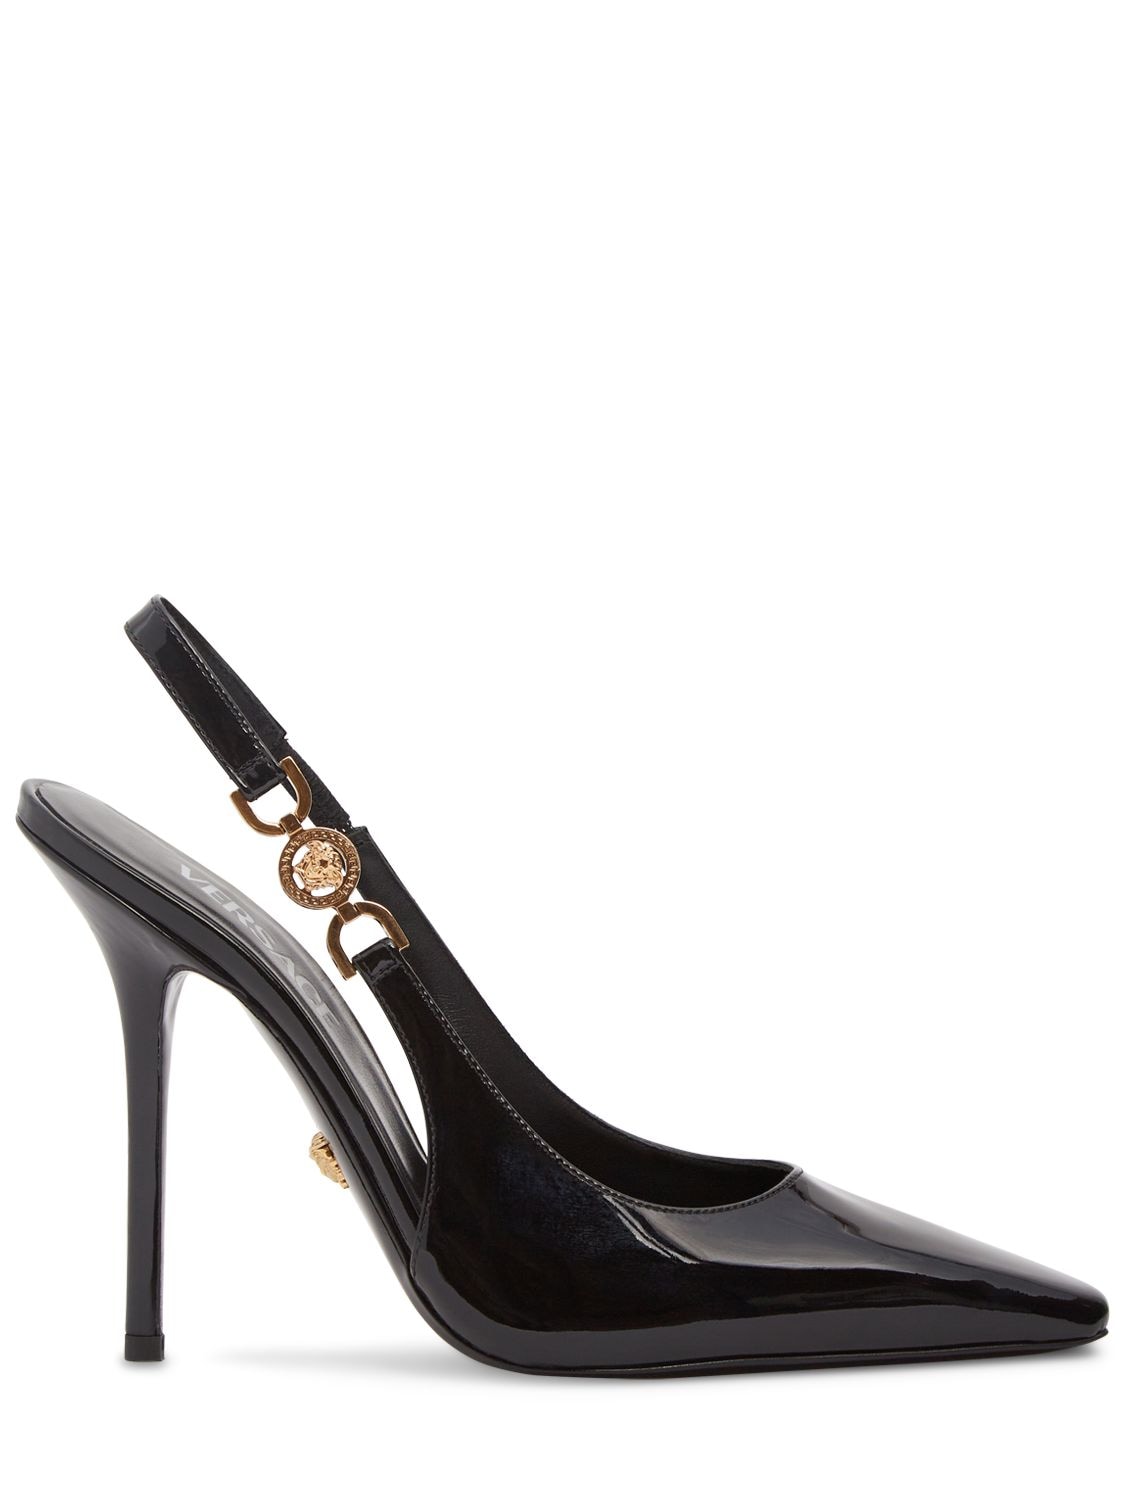 Versace 110mm Patent Leather Slingback Heels In Black